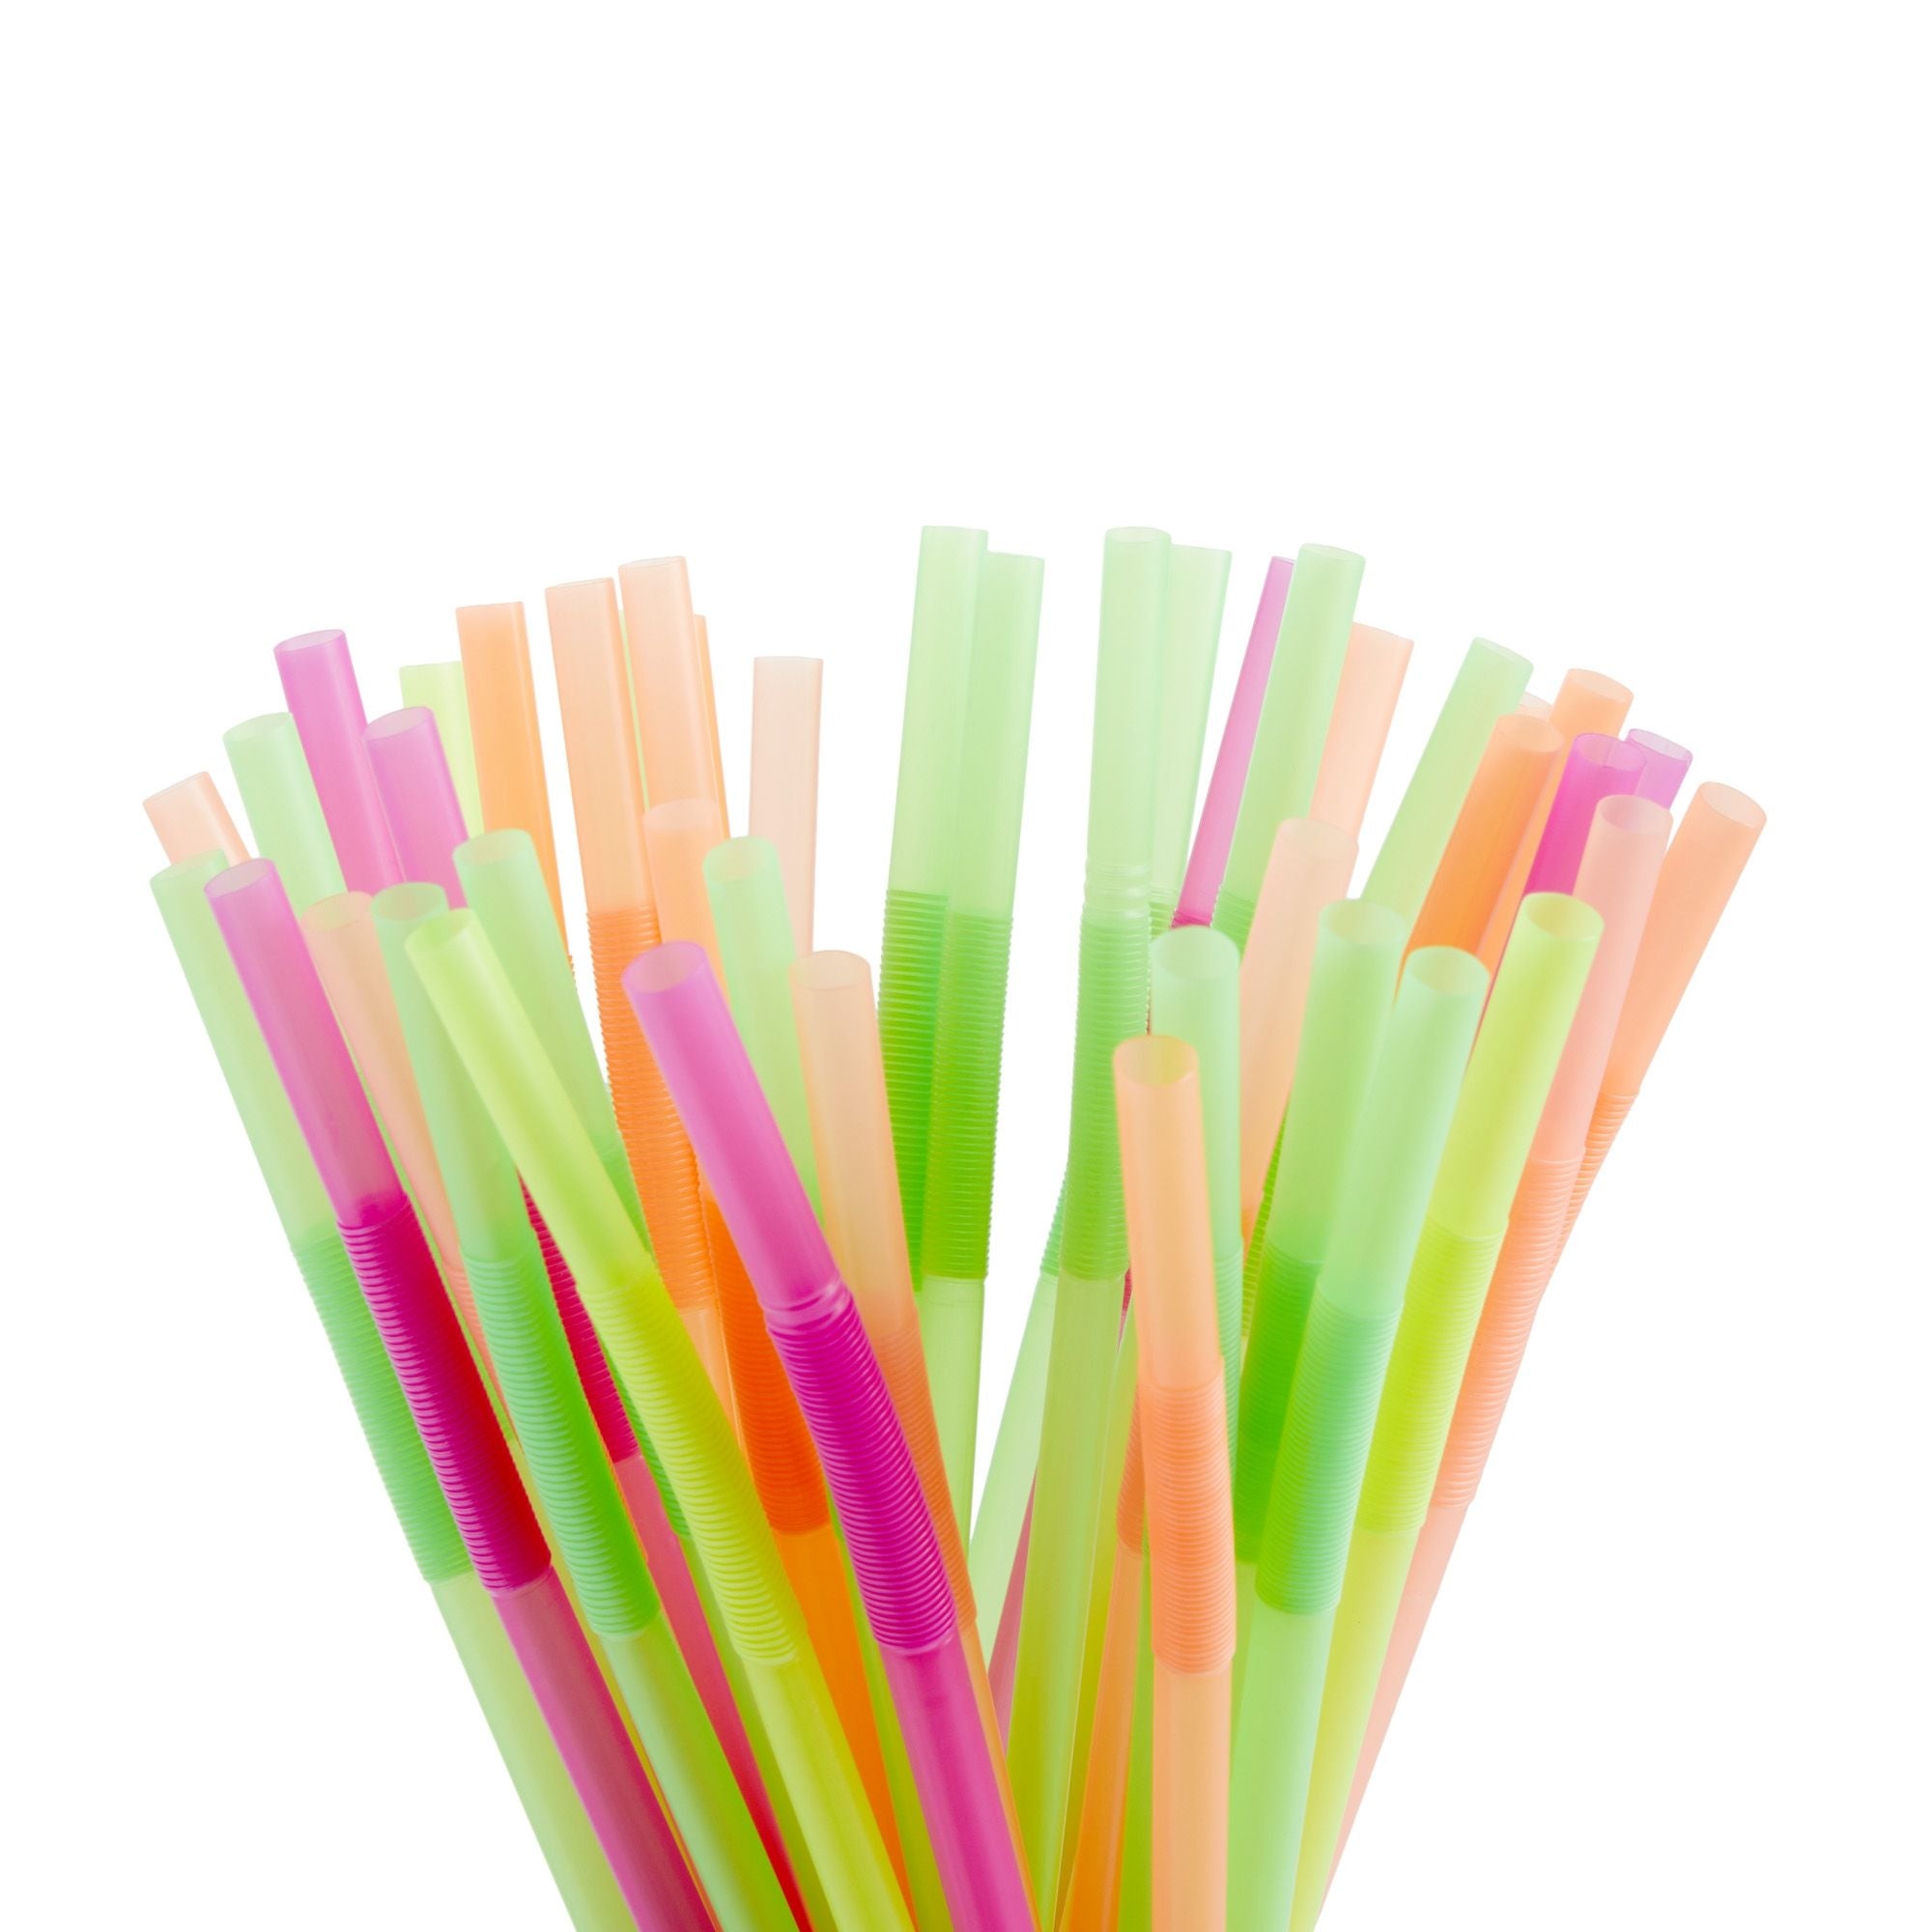 200 PCS Extended Straws Plastic,13 inch Straws,BPA-Free Drinking Straw,  Flexible Reusable Straws, Bendy Fancy Straws, Party Decorations